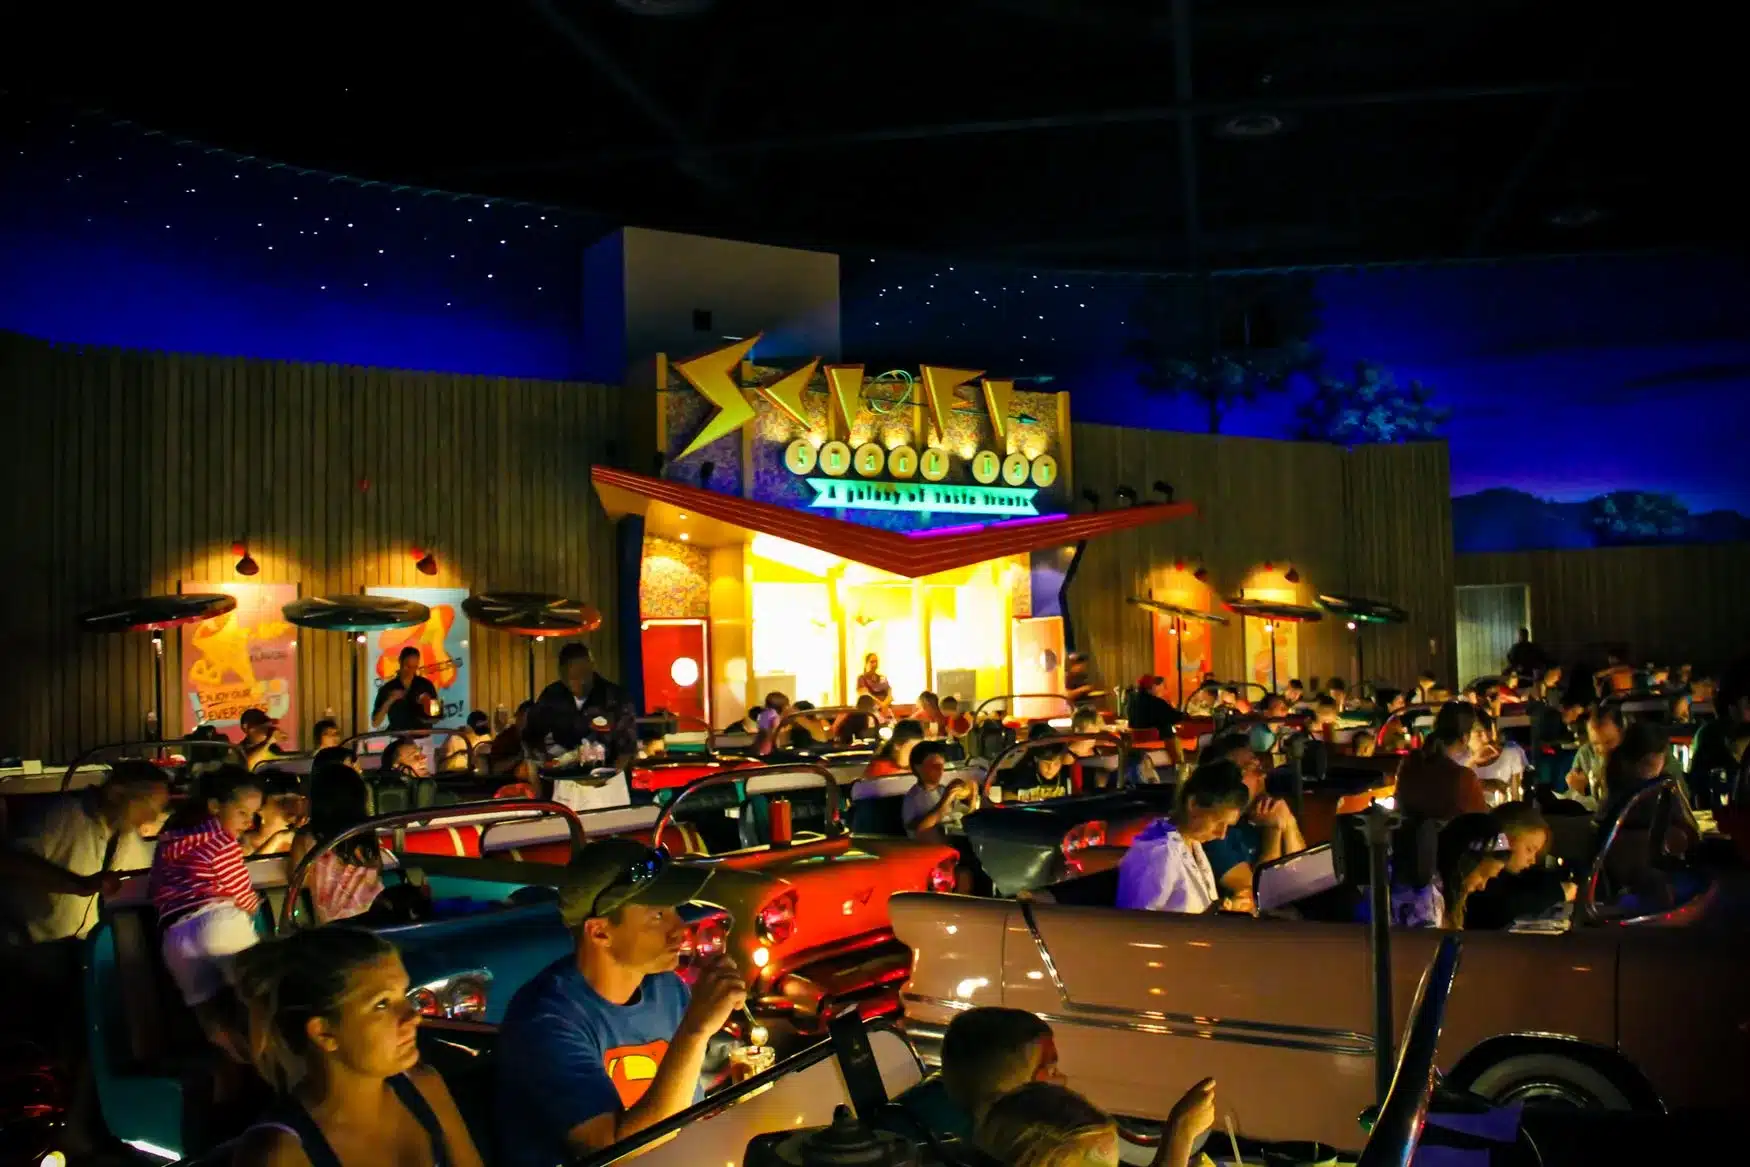 Sci Fi Dine-In Restaurant at Hollywood Studios - Guests sitting in classic cars eating food while watching a movie